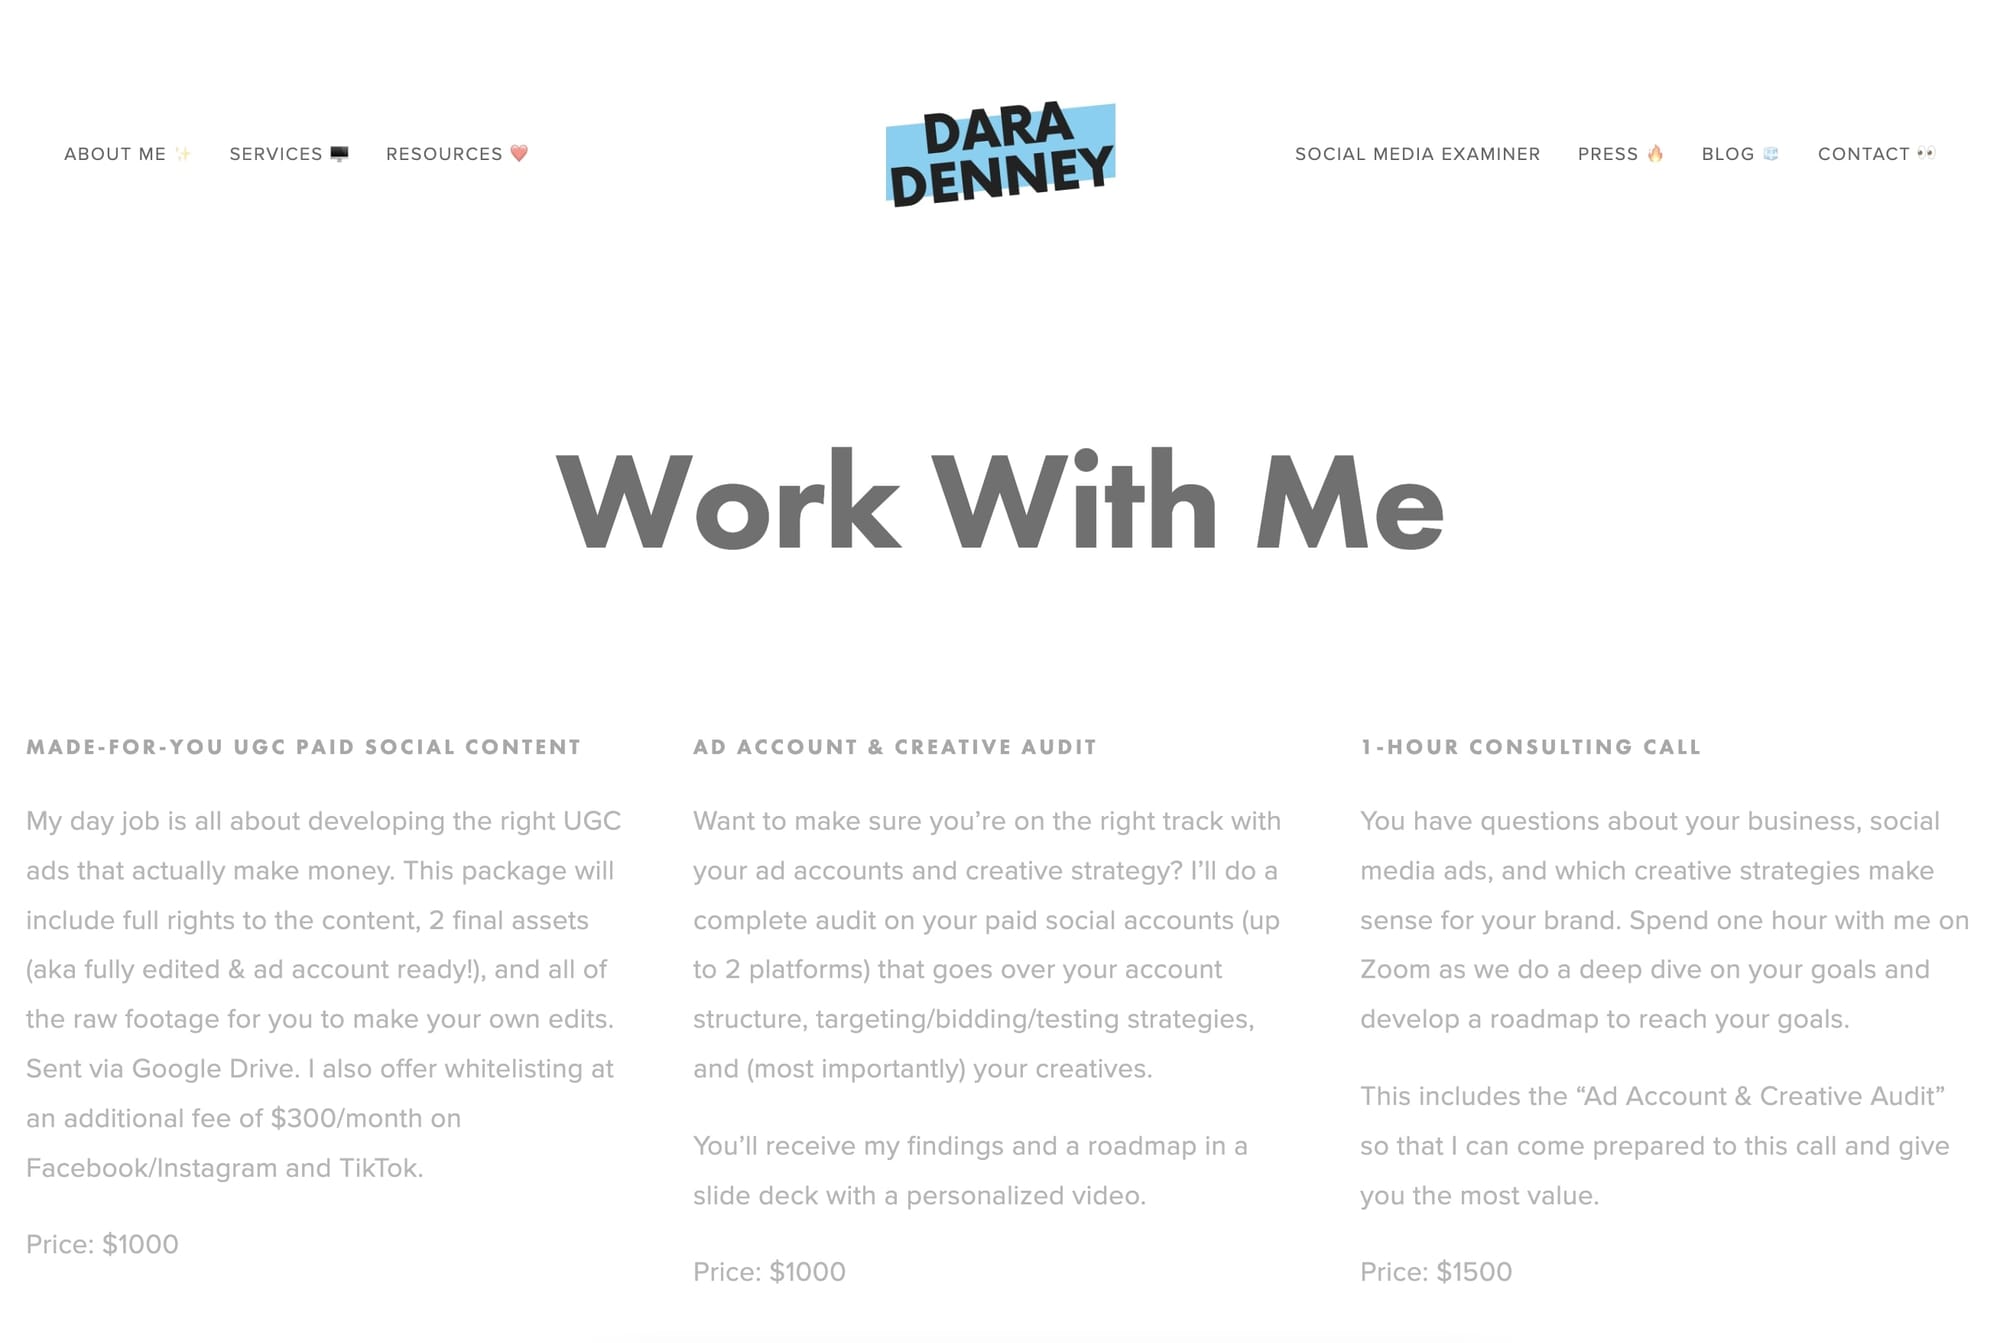 Dara Denney's consulting packages